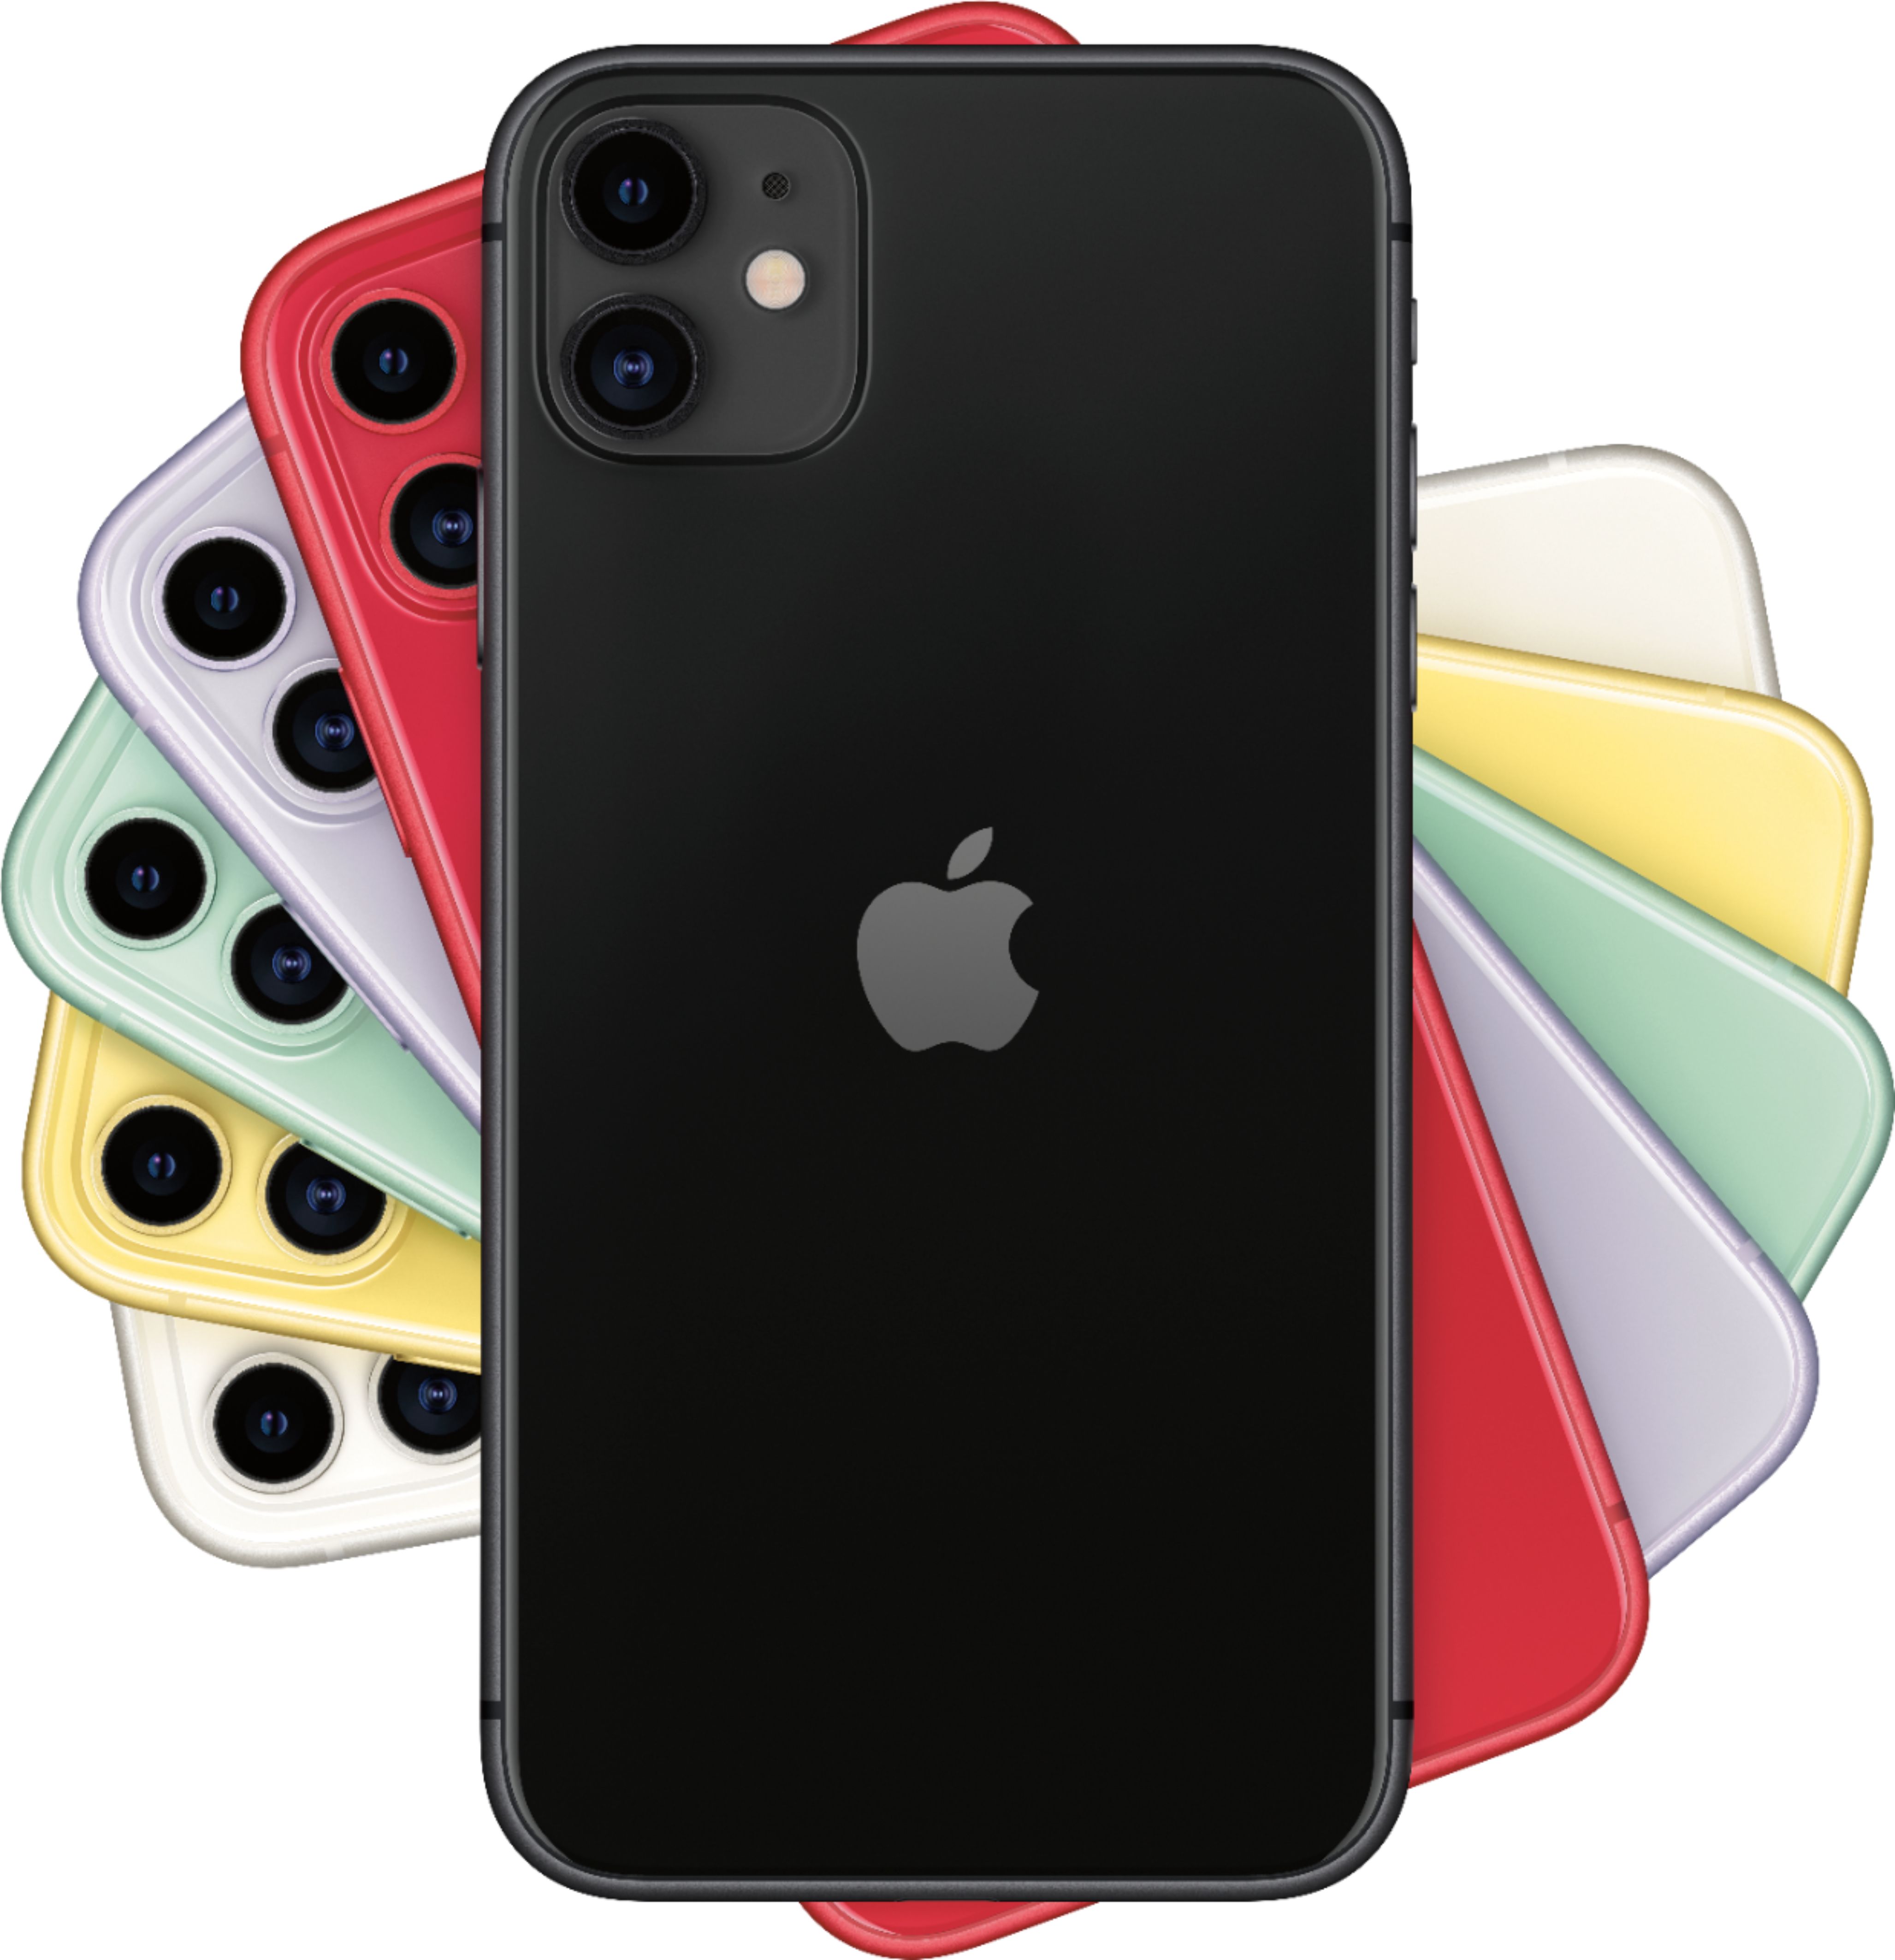 Iphone 12 Iphone 11 Price In India 64gb 2018 Promo Codes For Roblox Robux - how to buy robux on iphone 11